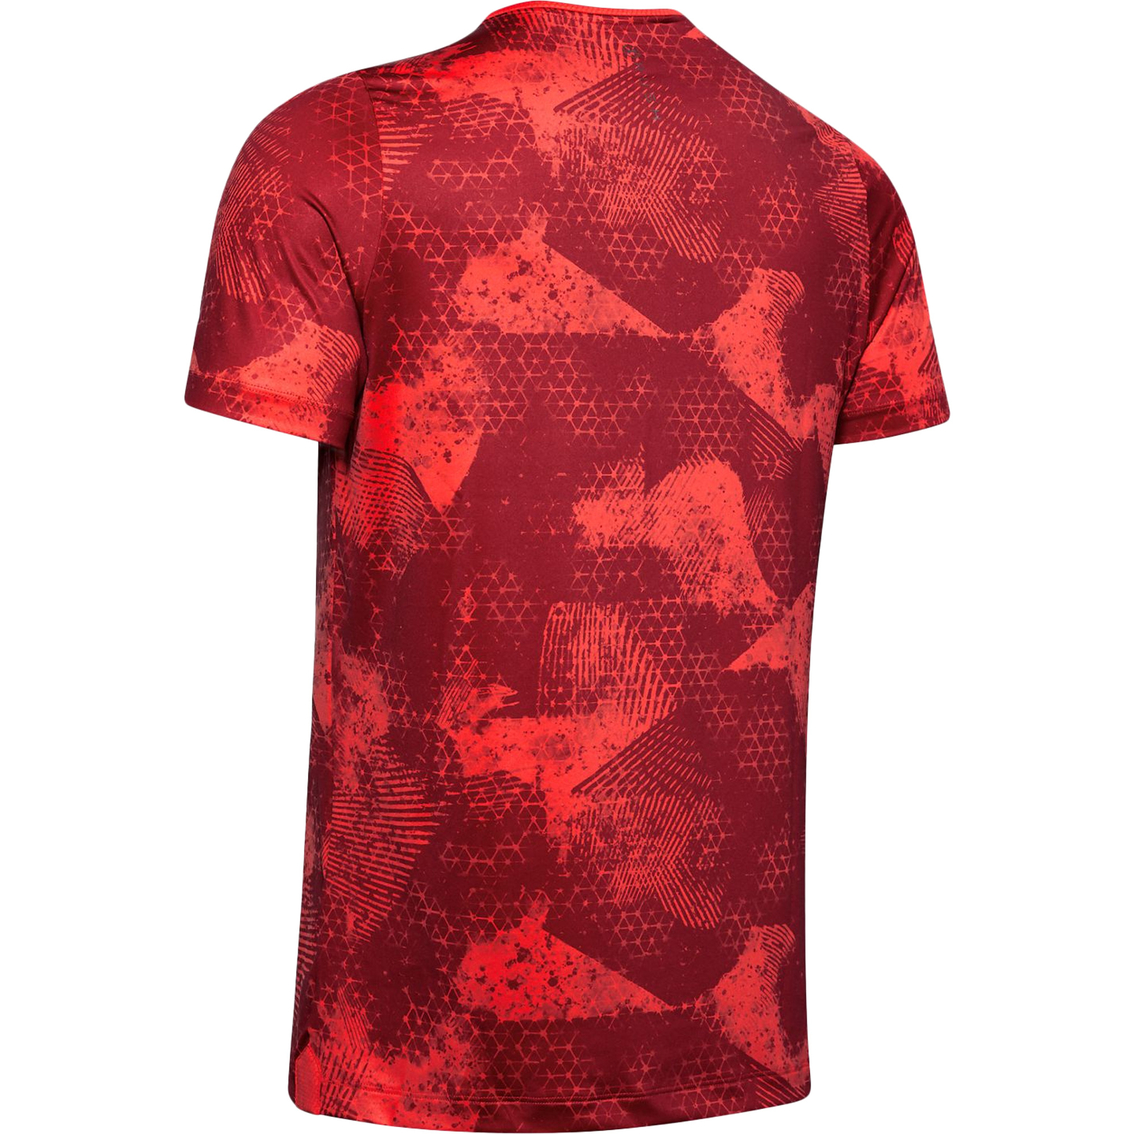 Under Armour Heatgear Rush Fitted Tee - Image 6 of 6